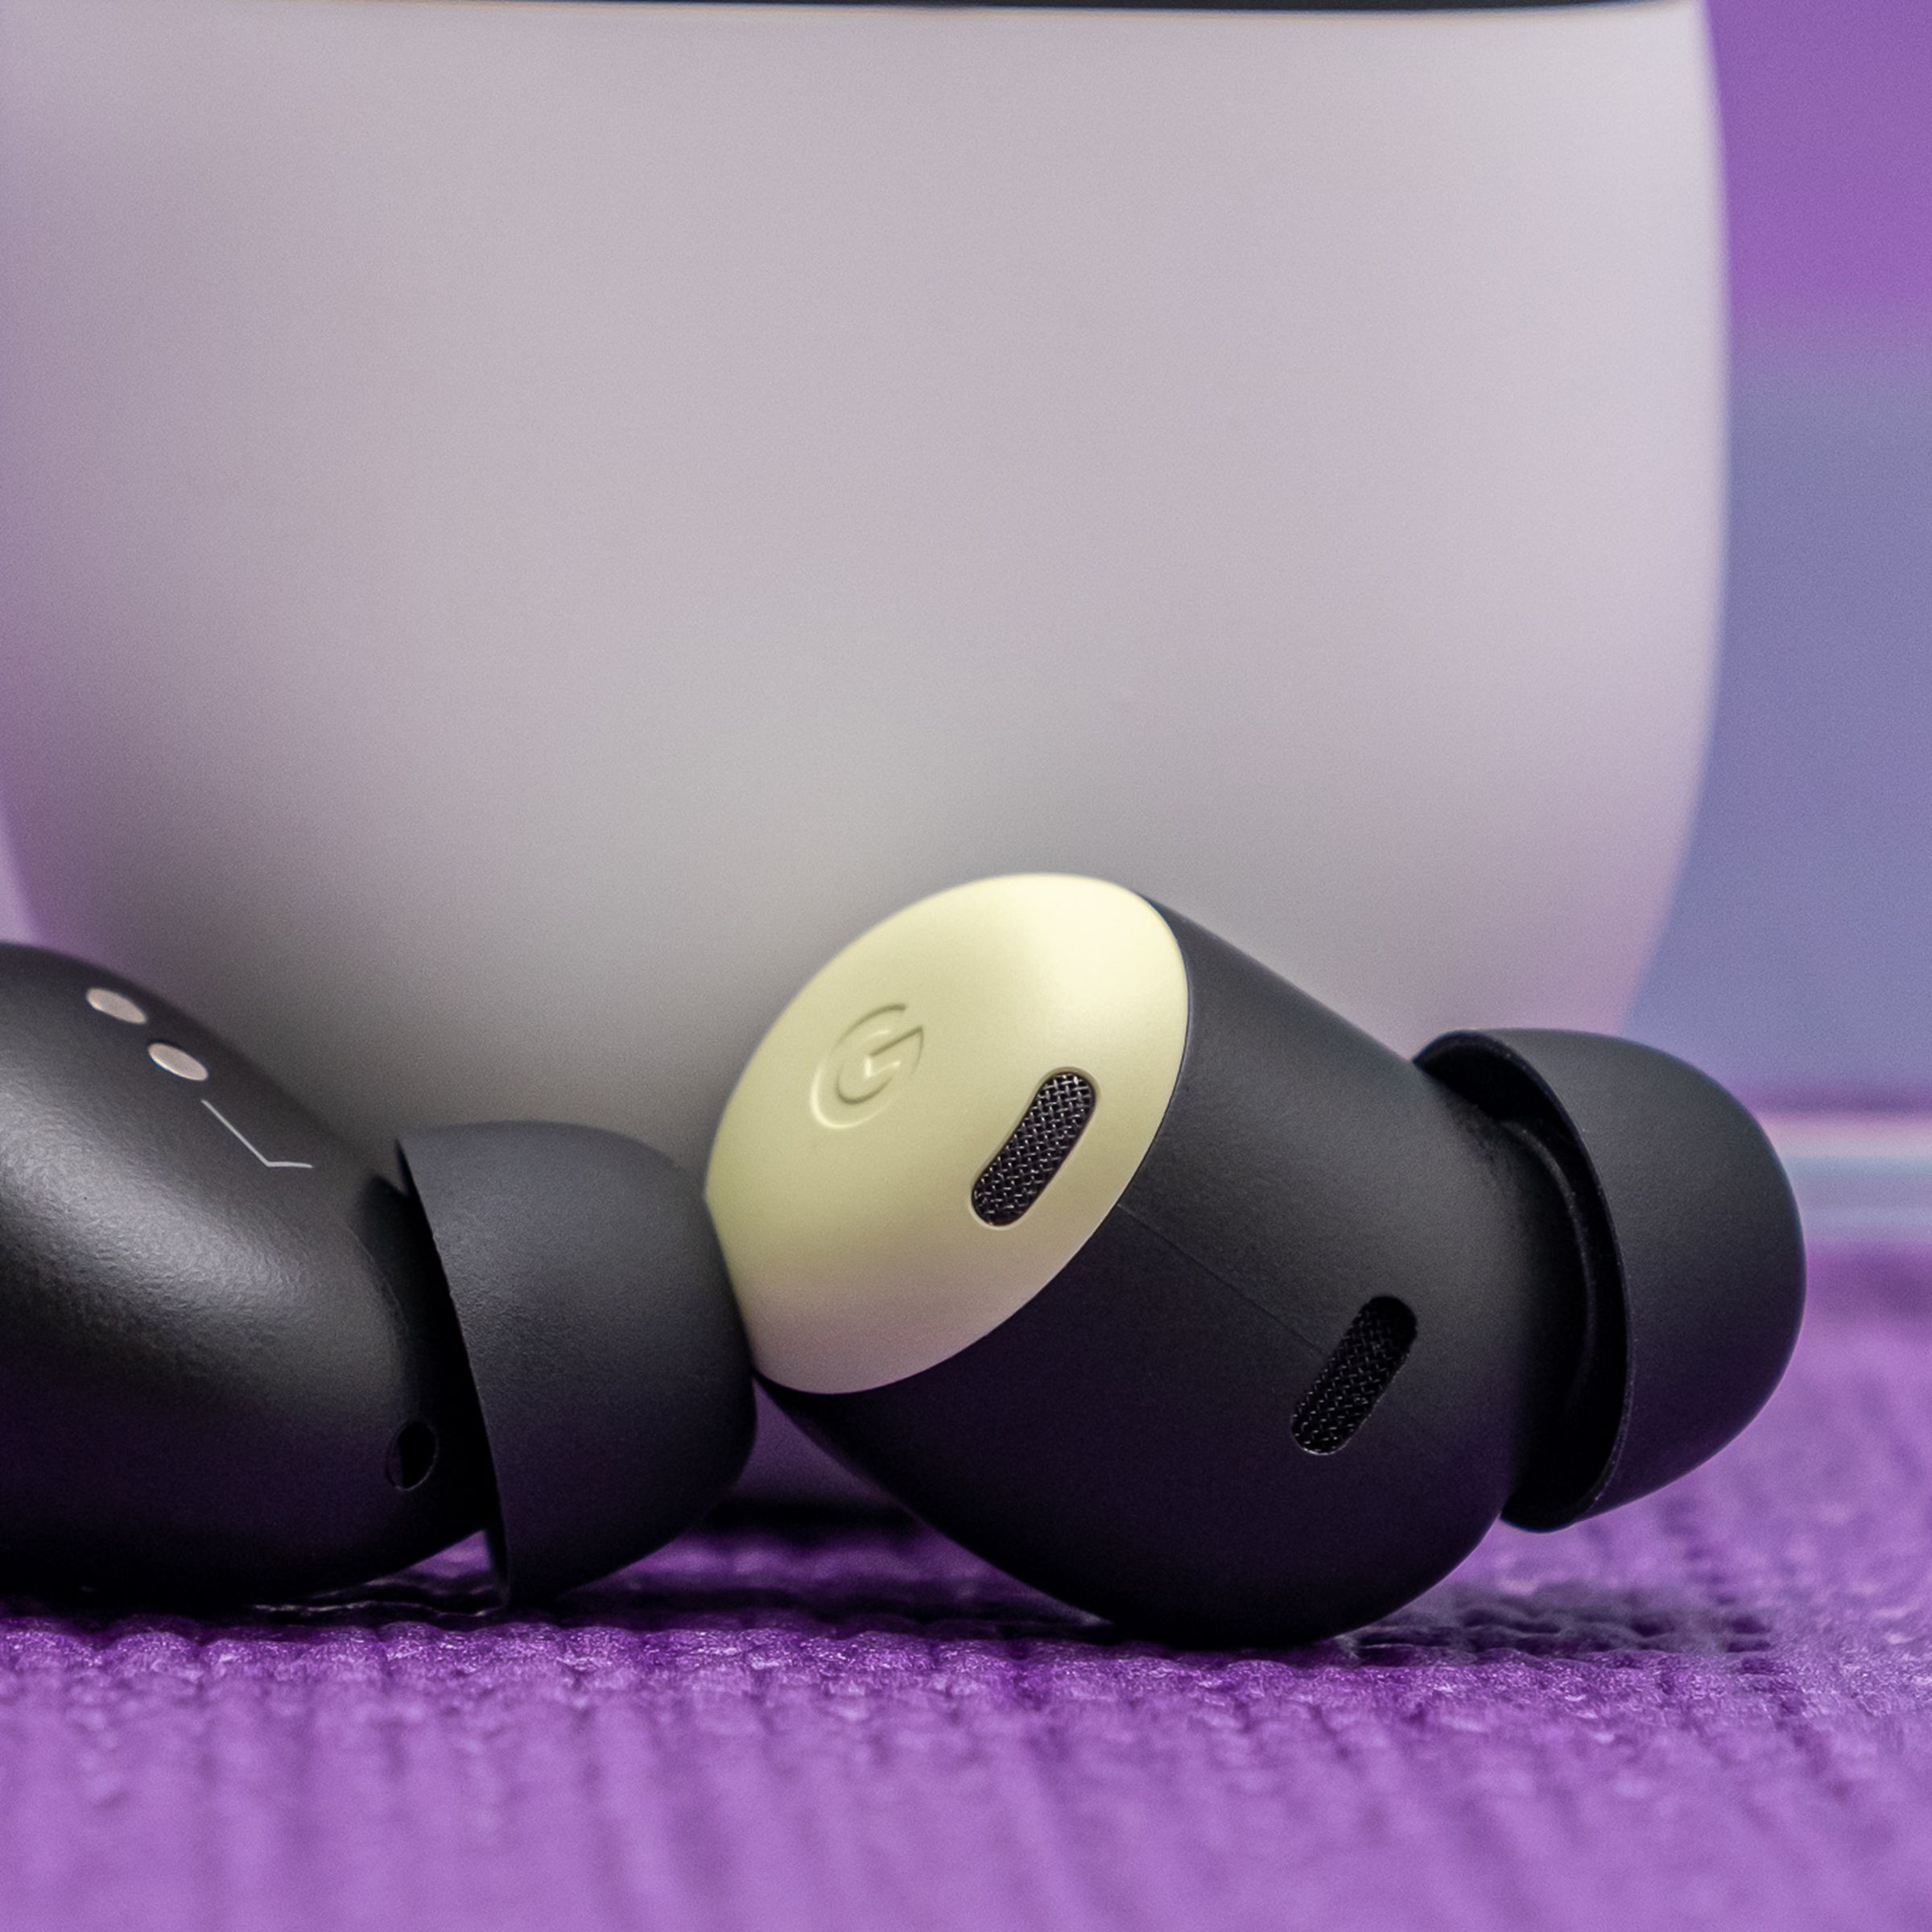 Google’s Pixel Buds Pro earbuds, in yellow lemongrass color, resting at the foot of their white charging case on a tabletop.